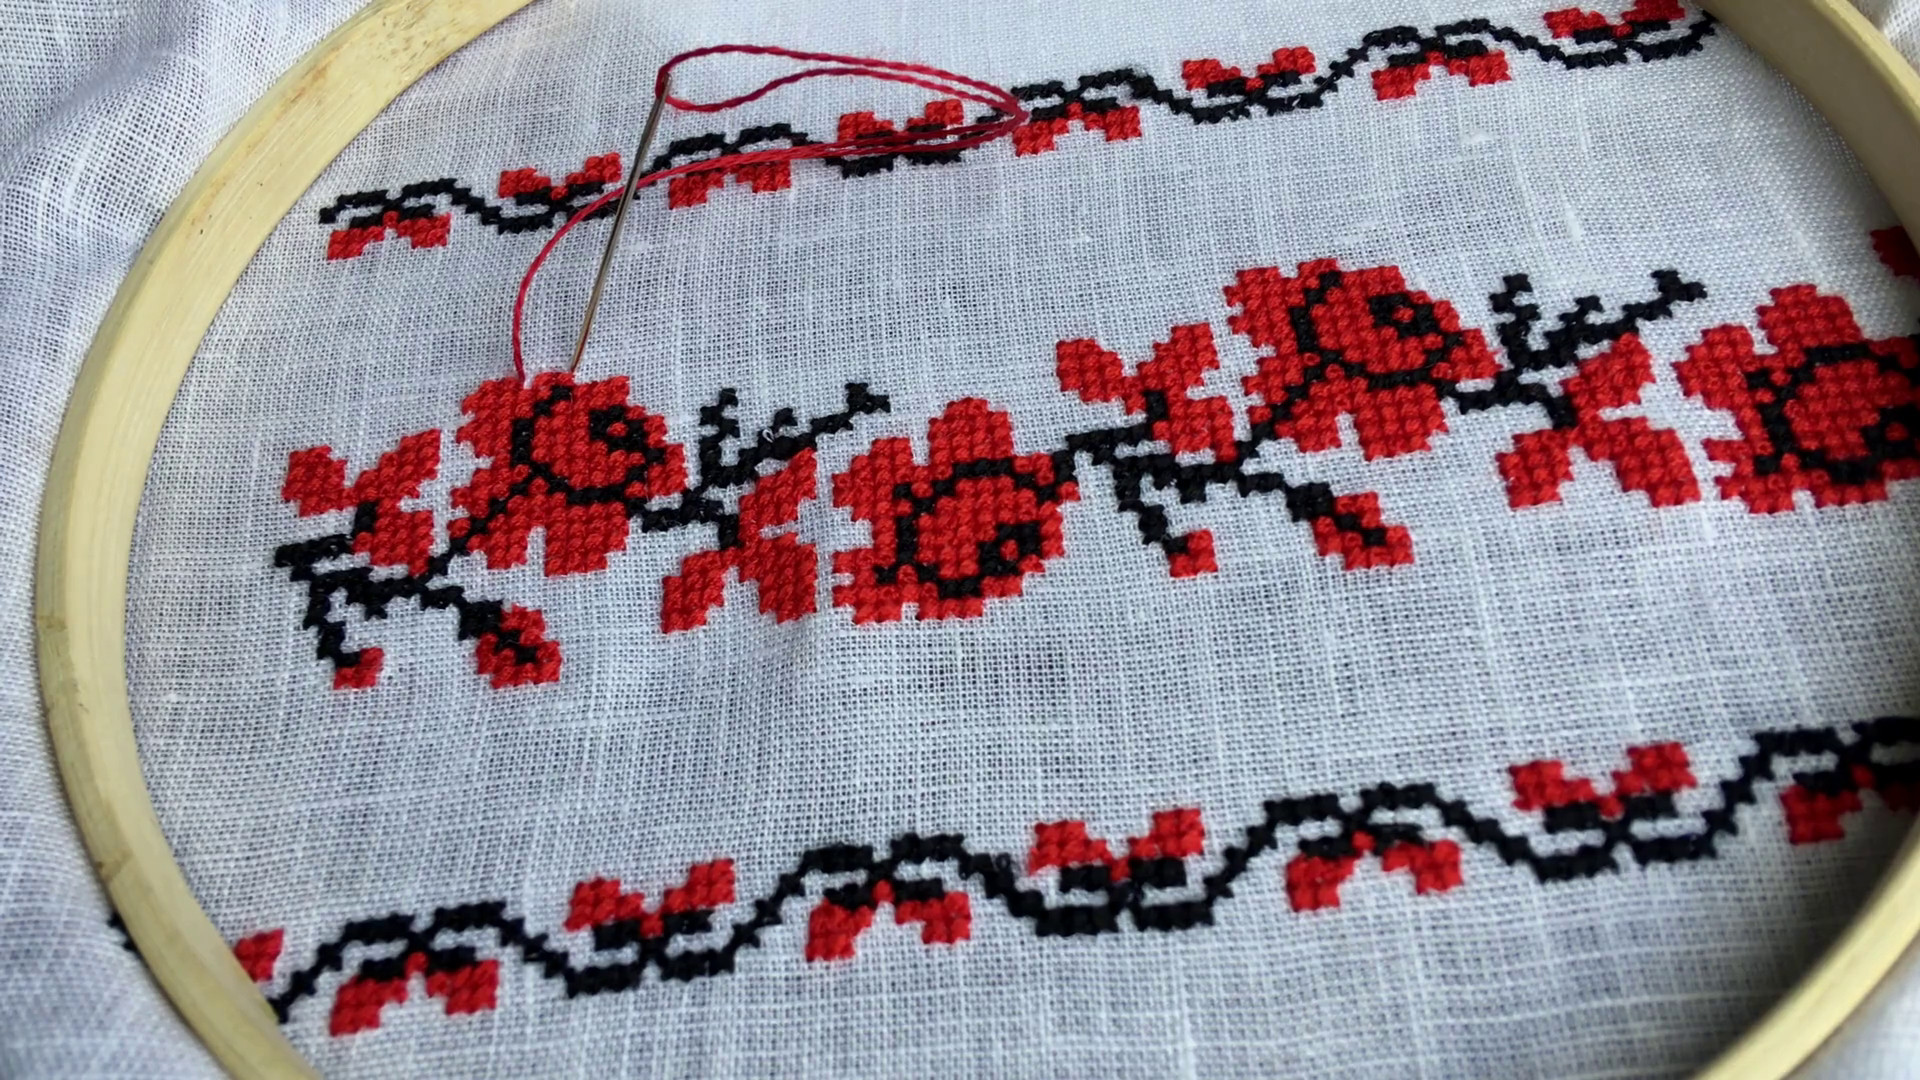 Embroidery Cross Stitch Patterns Hand Embroidery Cross Stitch Flower Ornament On A White Fabric In The Wooden Embroidery Hoop Top View Stock Video Footage Storyblocks Video